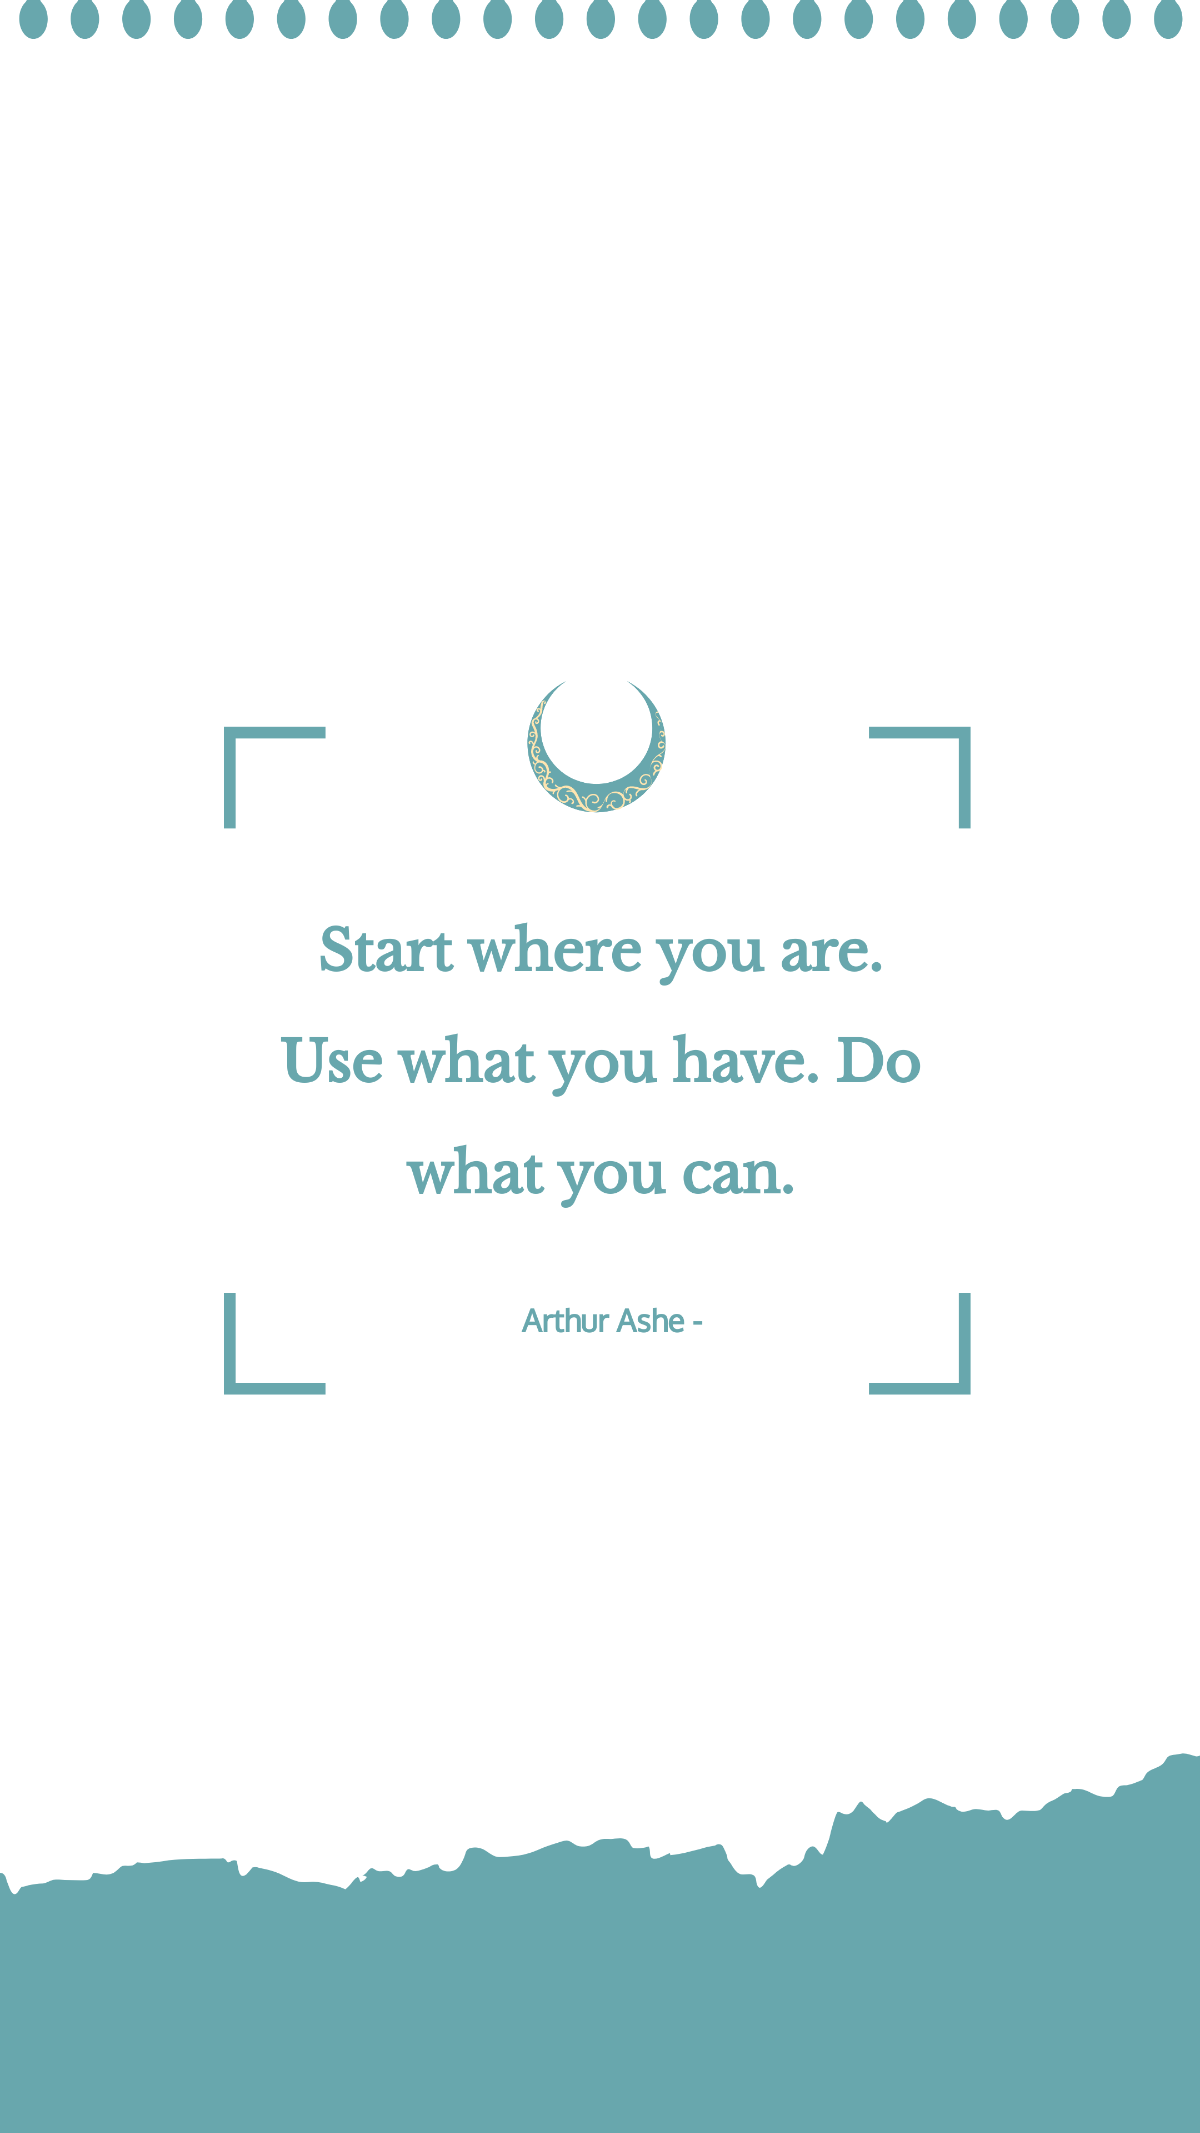 Arthur Ashe - Start where you are. Use what you have. Do what you can. Template